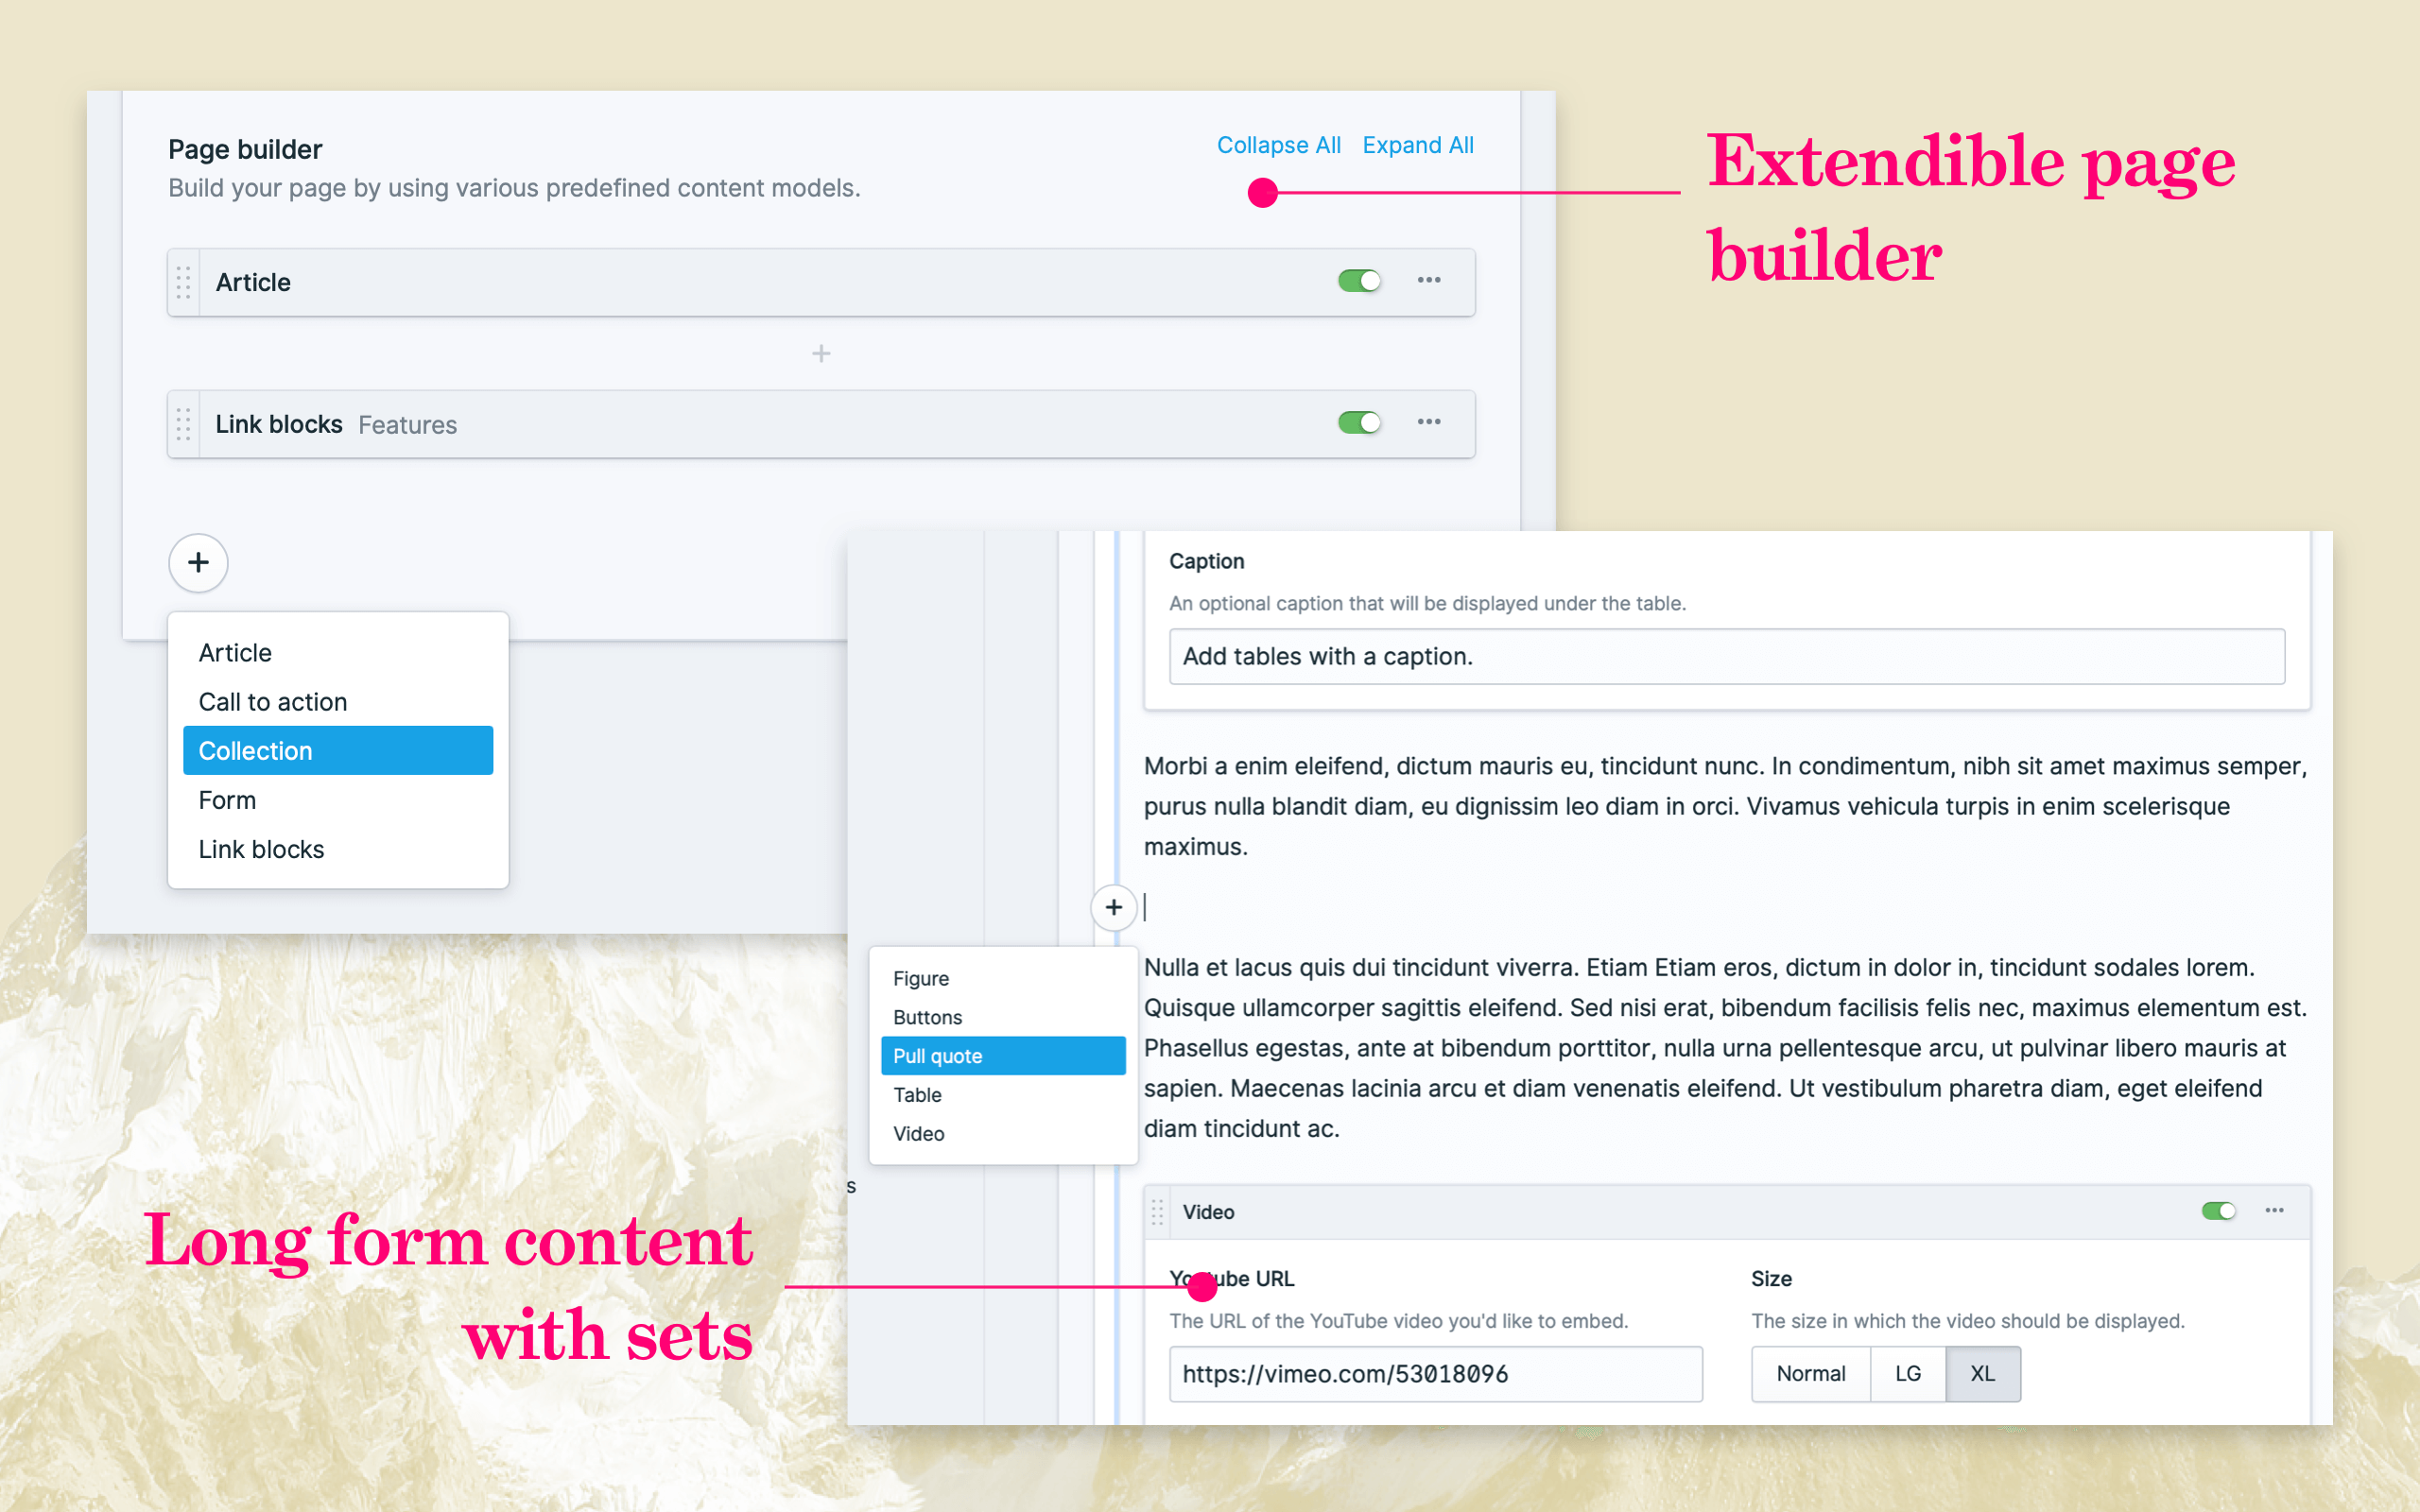 Extendible page builder and long form content with sets.